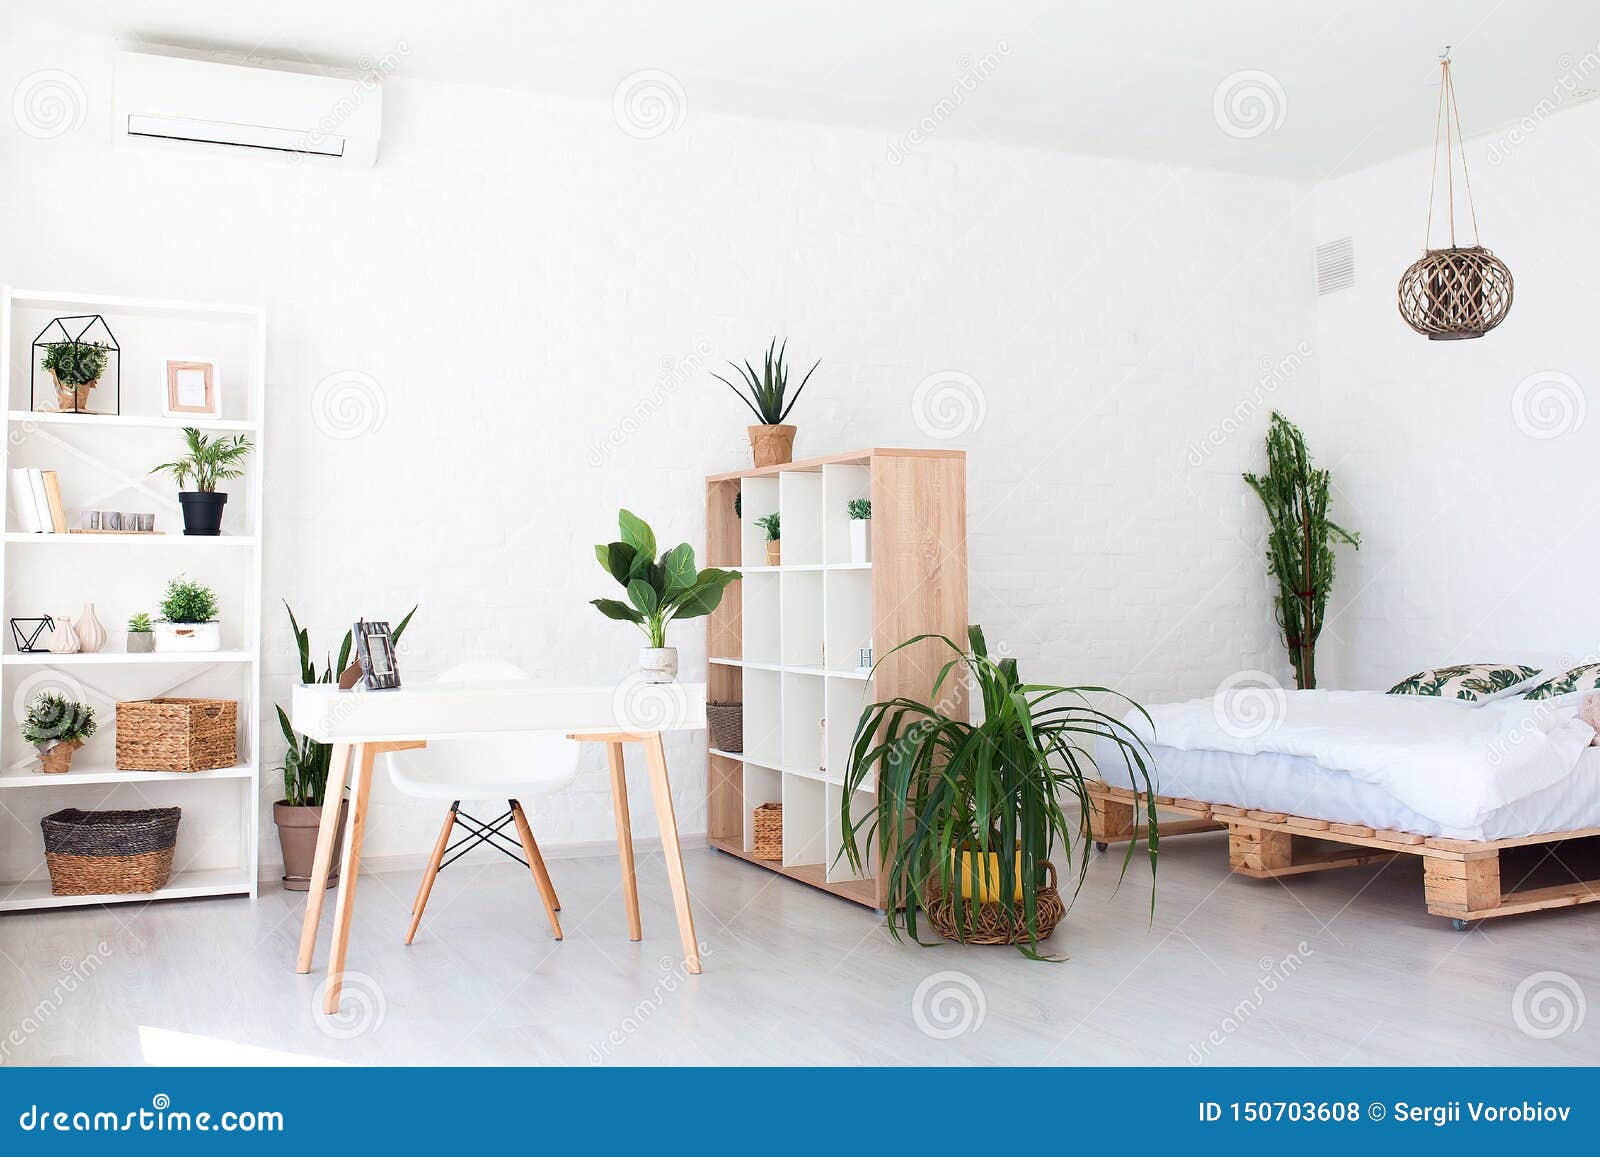 Cozy Interior Design Of Modern Studio Apartment In Scandinavian Style. A  Spacious Huge Room In Light Colors With Wooden Stock Photo - Image Of  Light, Luxury: 150703608